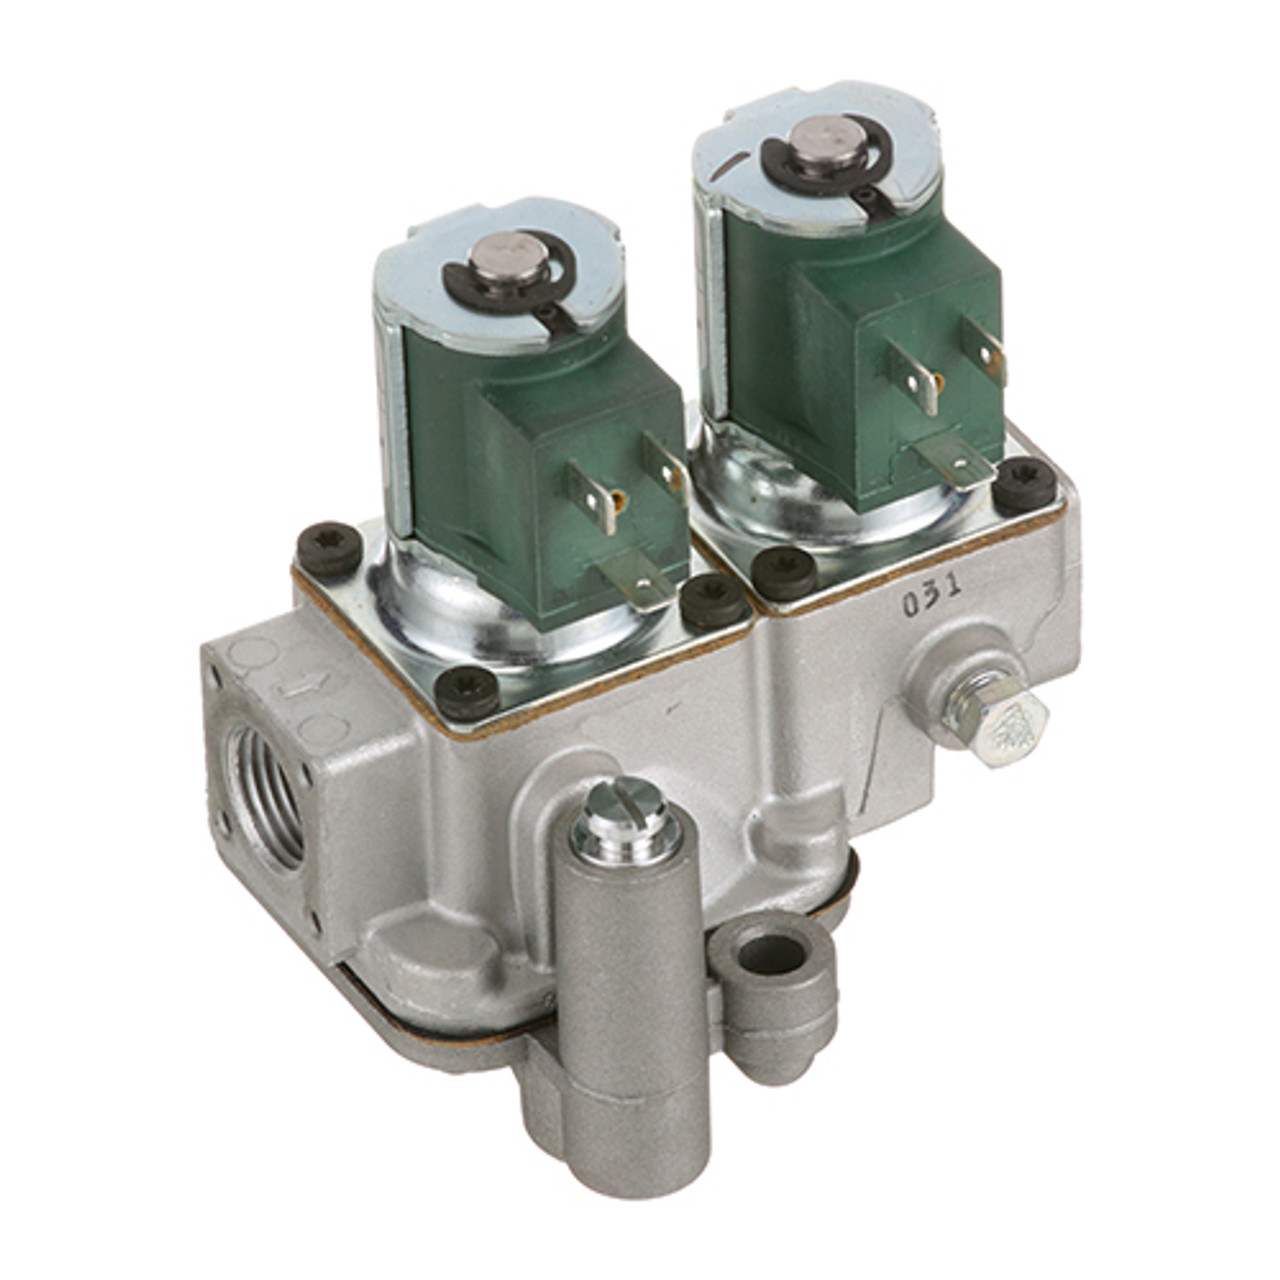 Valve, Solenoid - Dual, 25V - Replacement Part For Middleby Marshall 59465